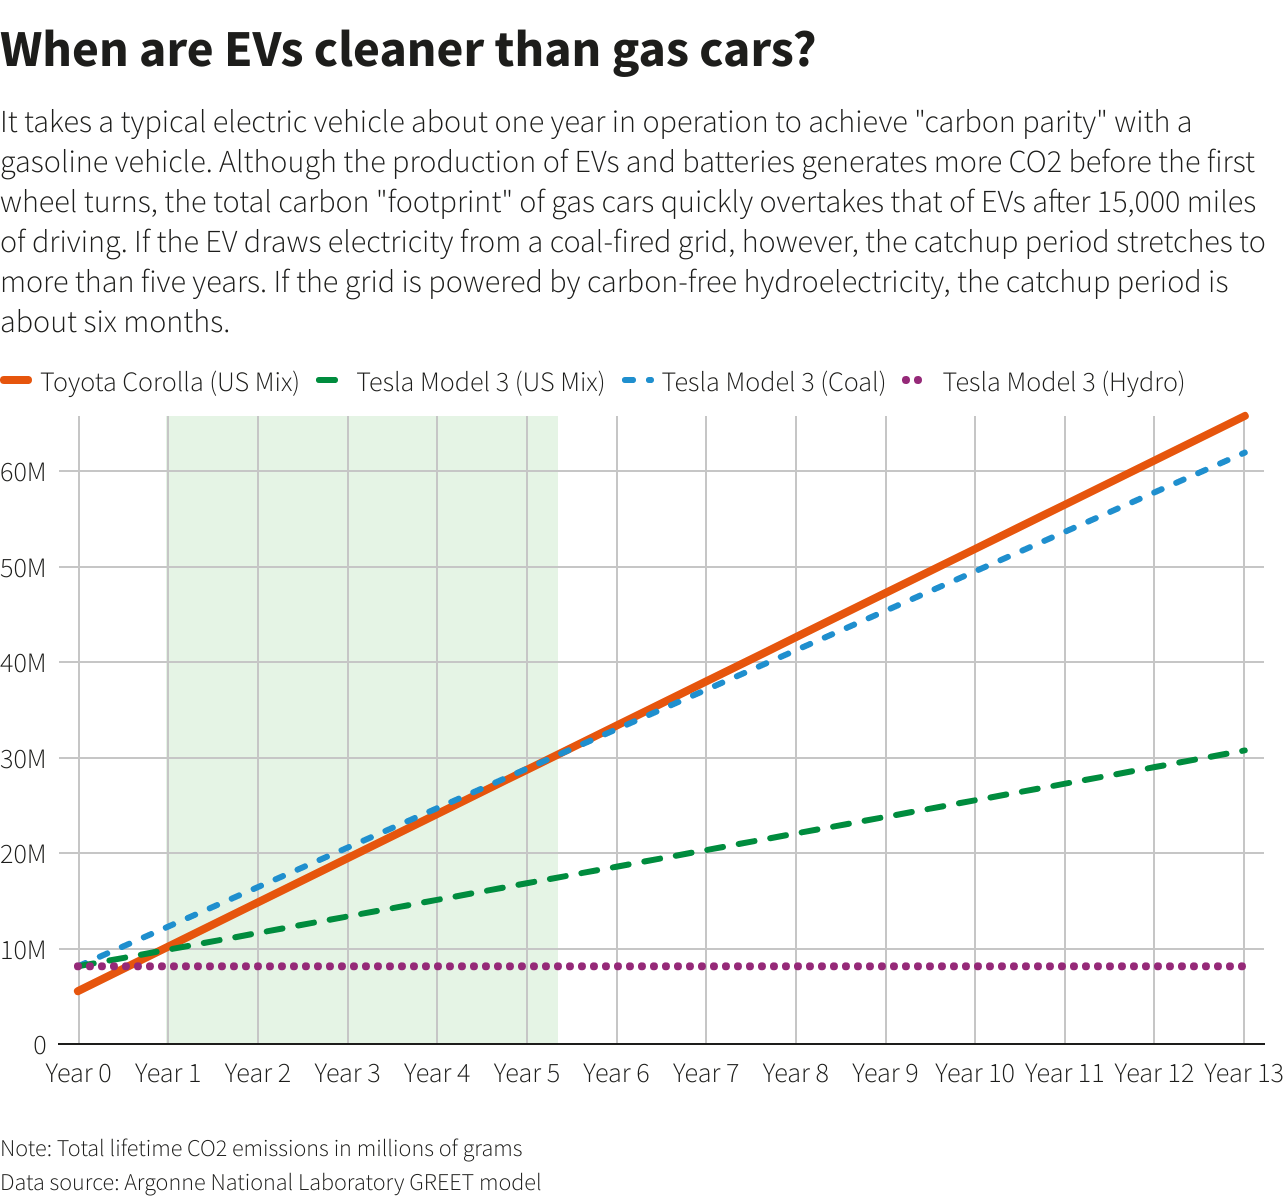 Analysis When do electric vehicles cleaner than gasoline cars